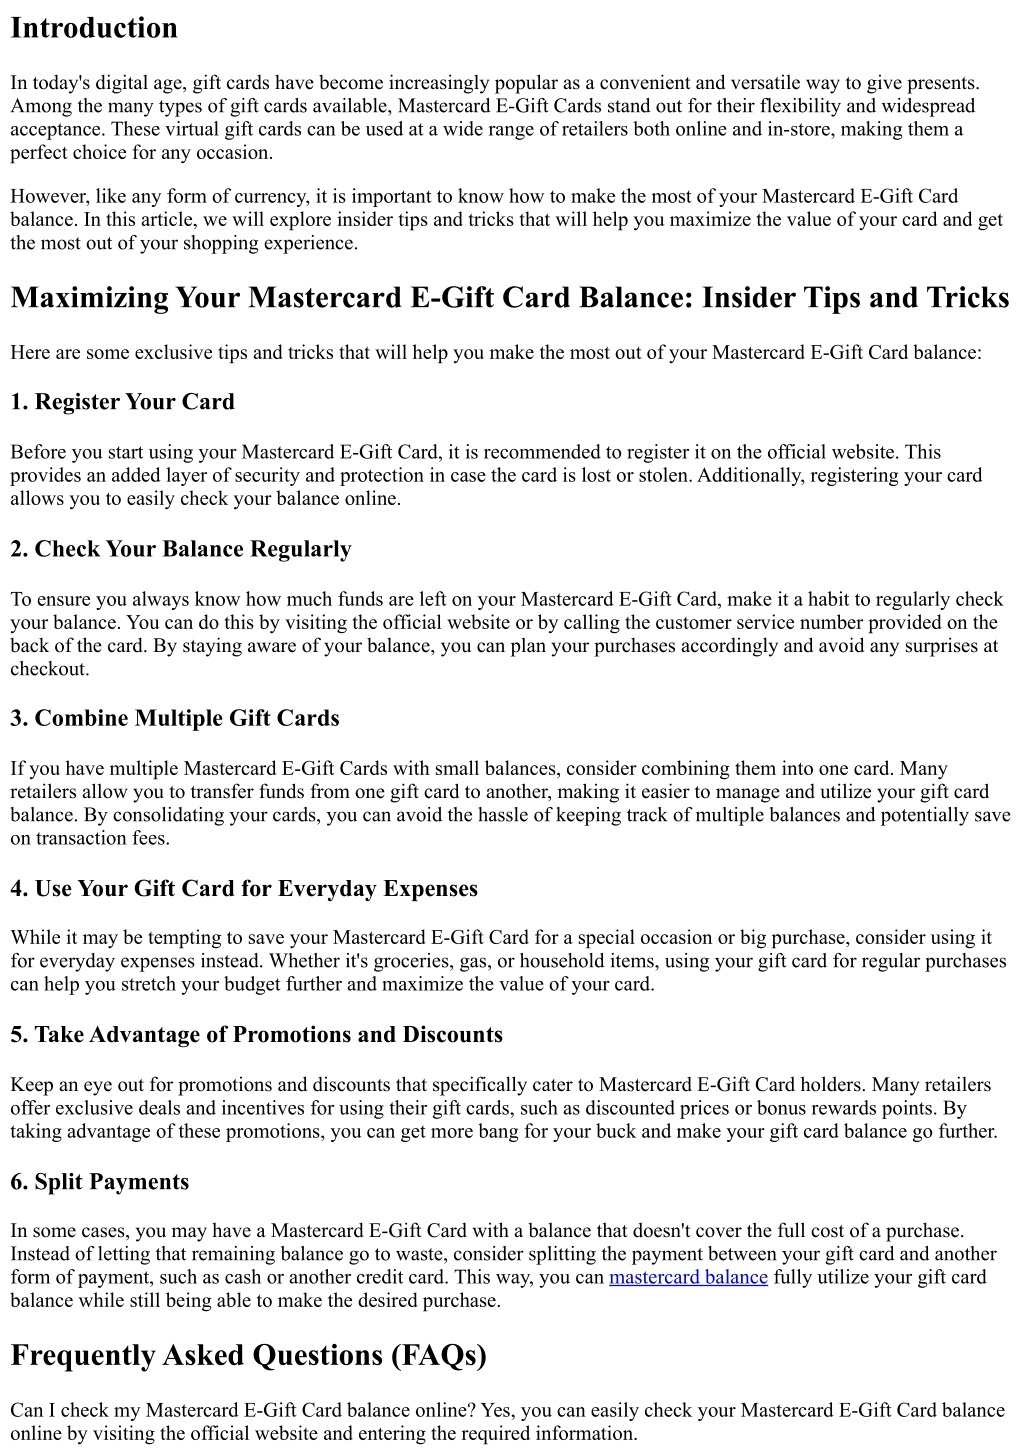 6 Essential Uses Of  Gift Card You Should Know